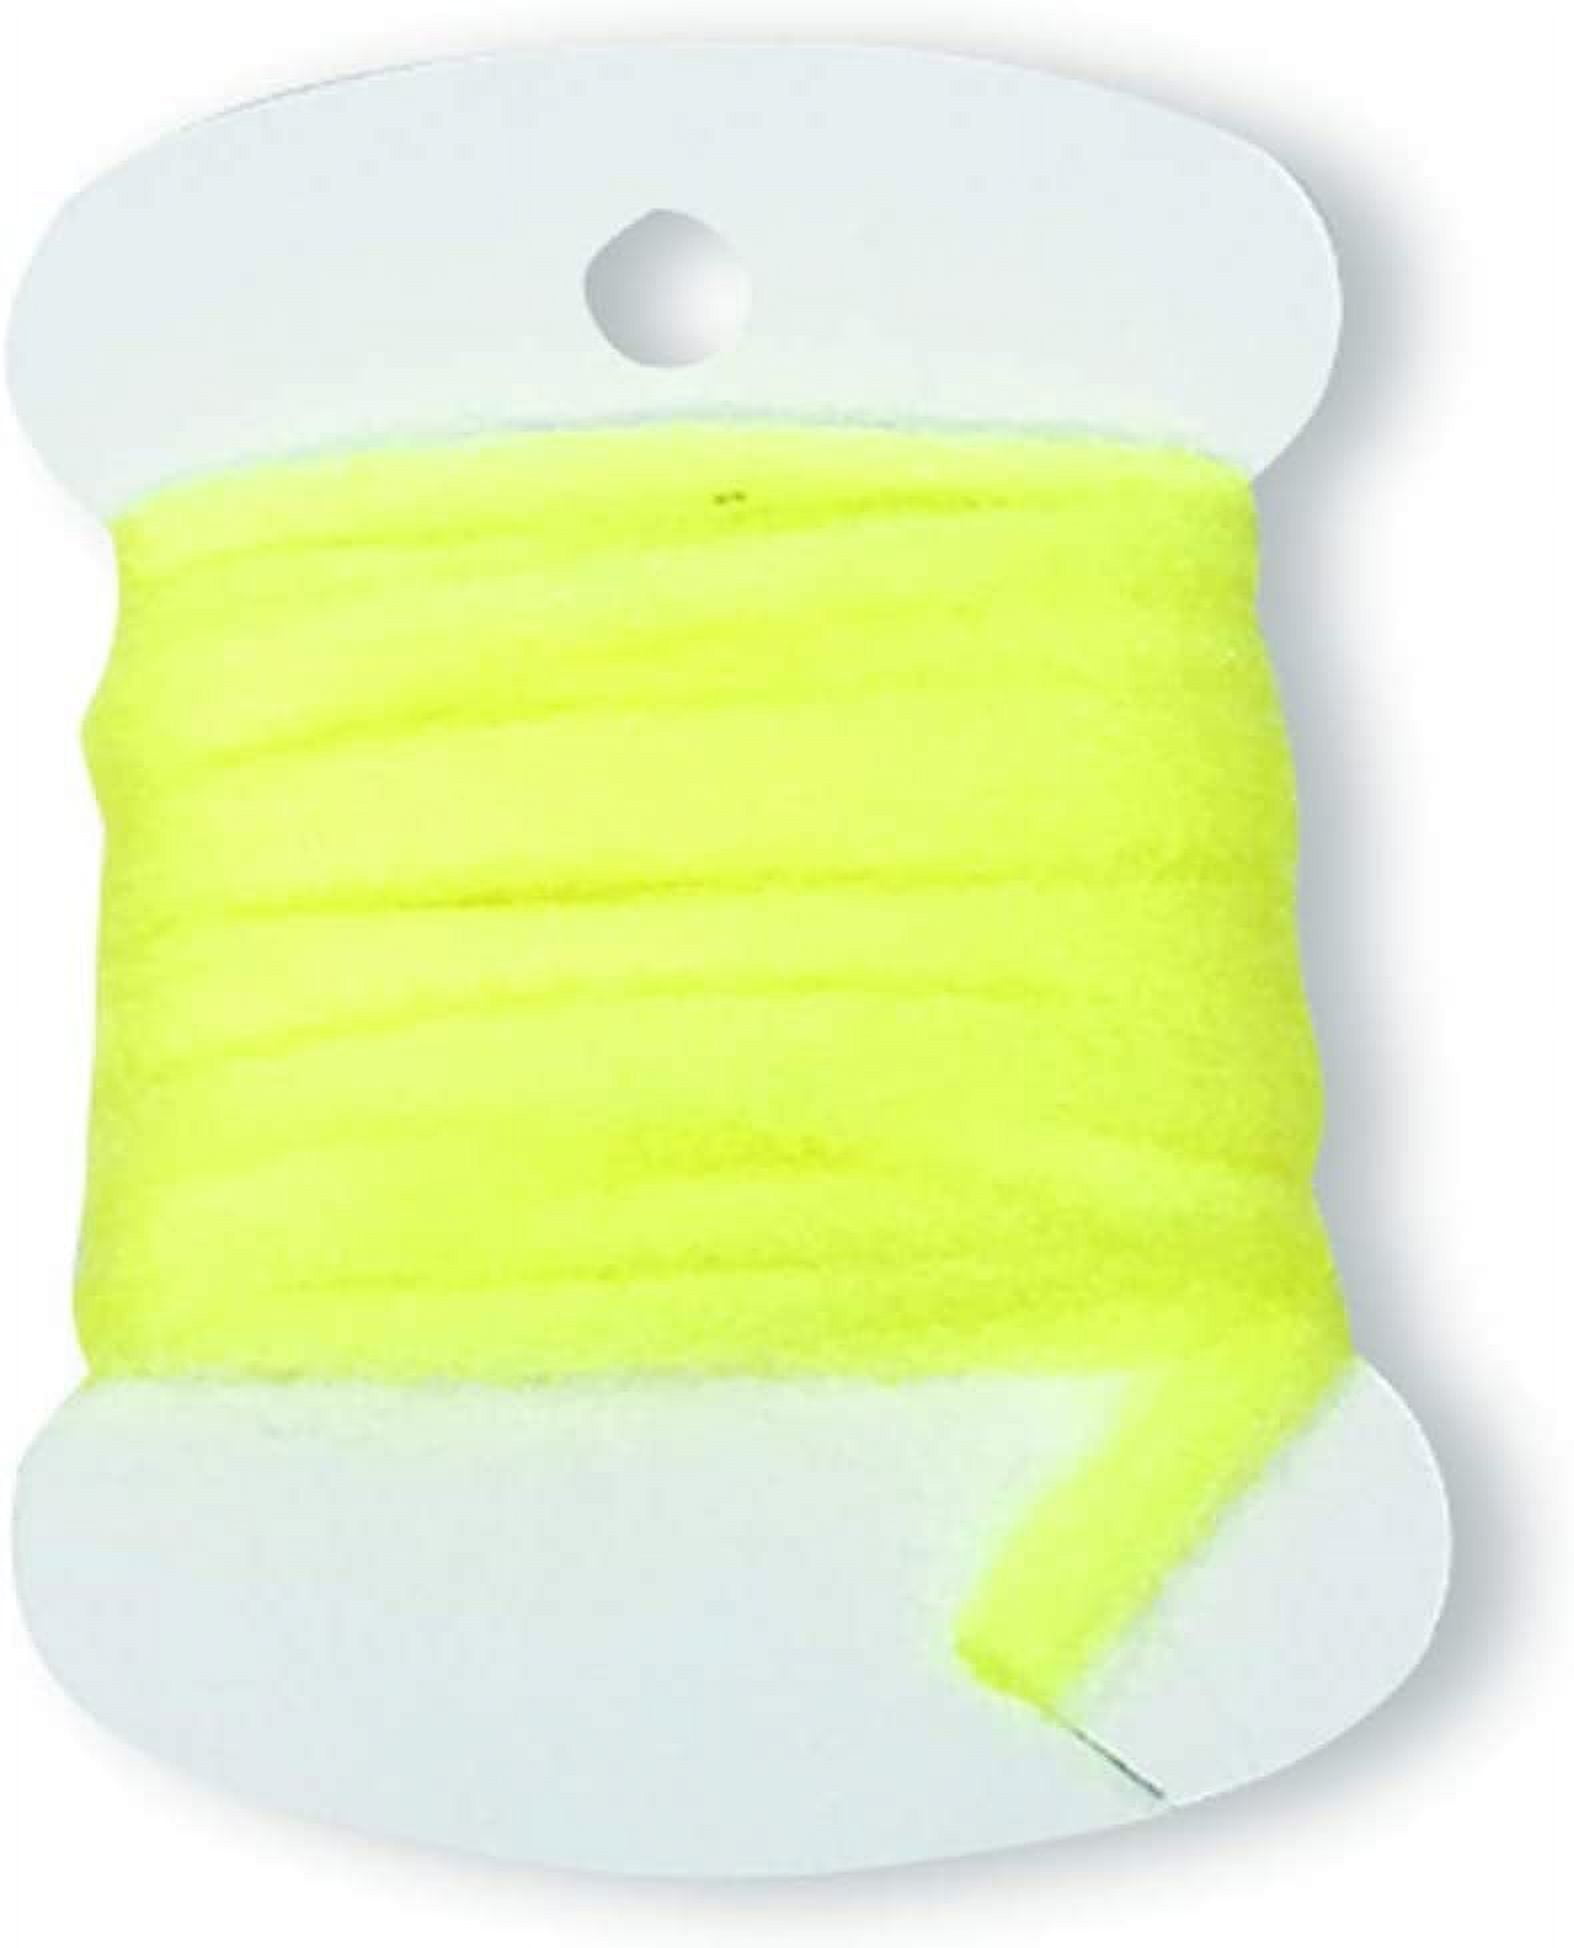 Creative Angler Glo Bug Yarn Fly Tying Materials - Fly Tying Thread for Tying  Flies - Fly Fishing Accessories Great for Your Fly Fishing Kit - Many  Colors to Choose from - 1.5 Yards 